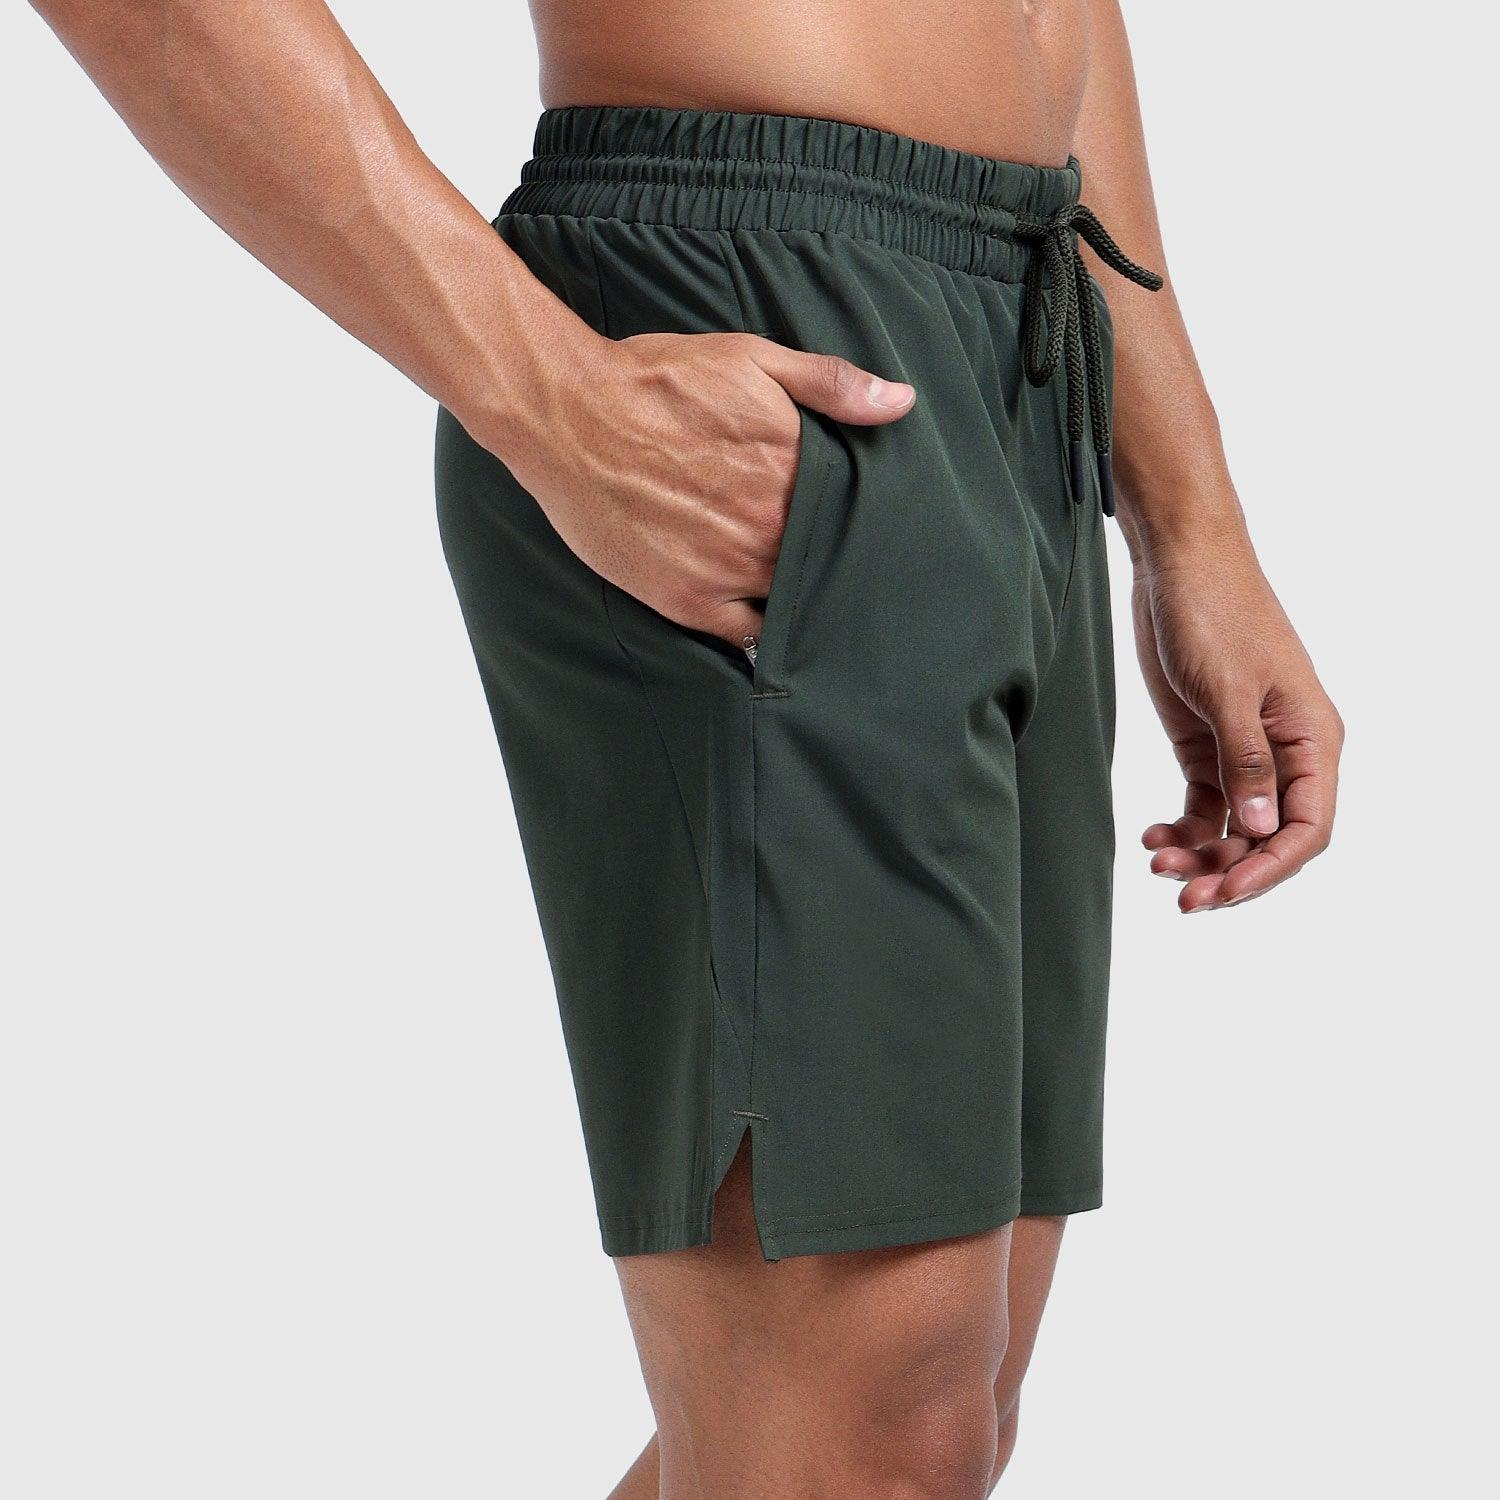 Denmonk's fashionable Coastline Comfort core olive shorts for men will boost your level of gym fitness.